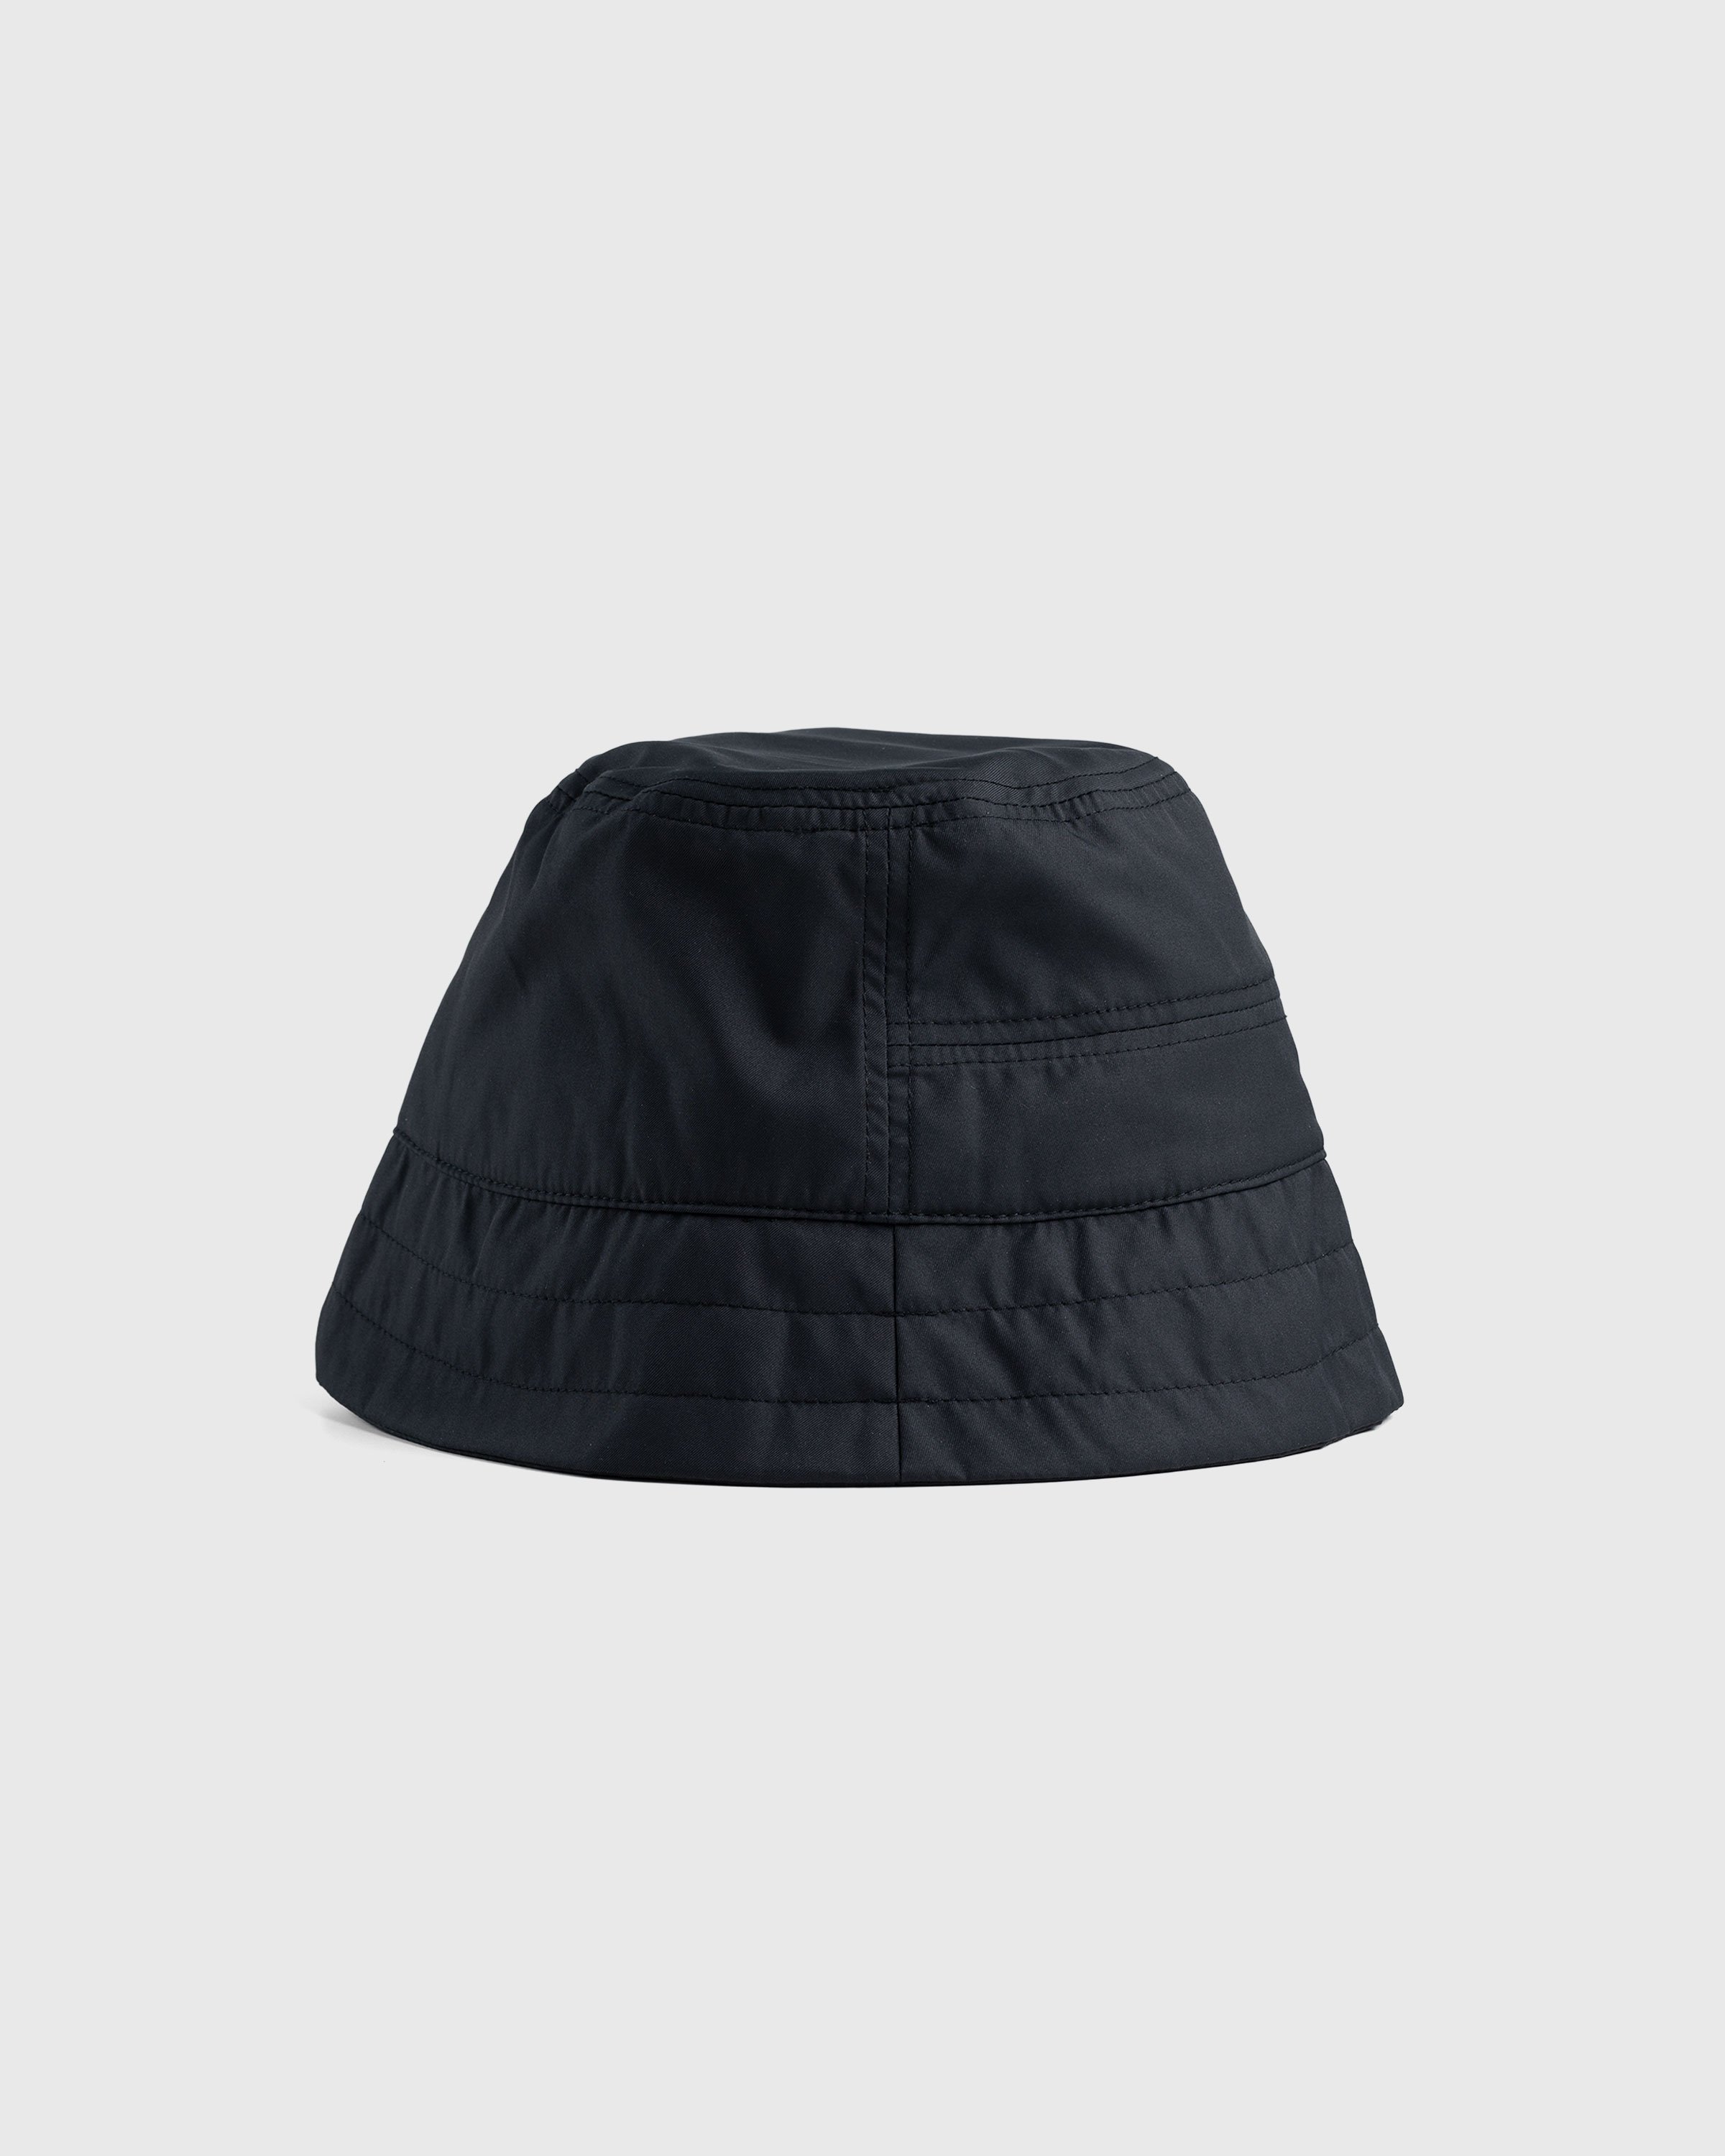 A-Cold-Wall* - Essential Bucket Hat Black - Accessories - Black - Image 2